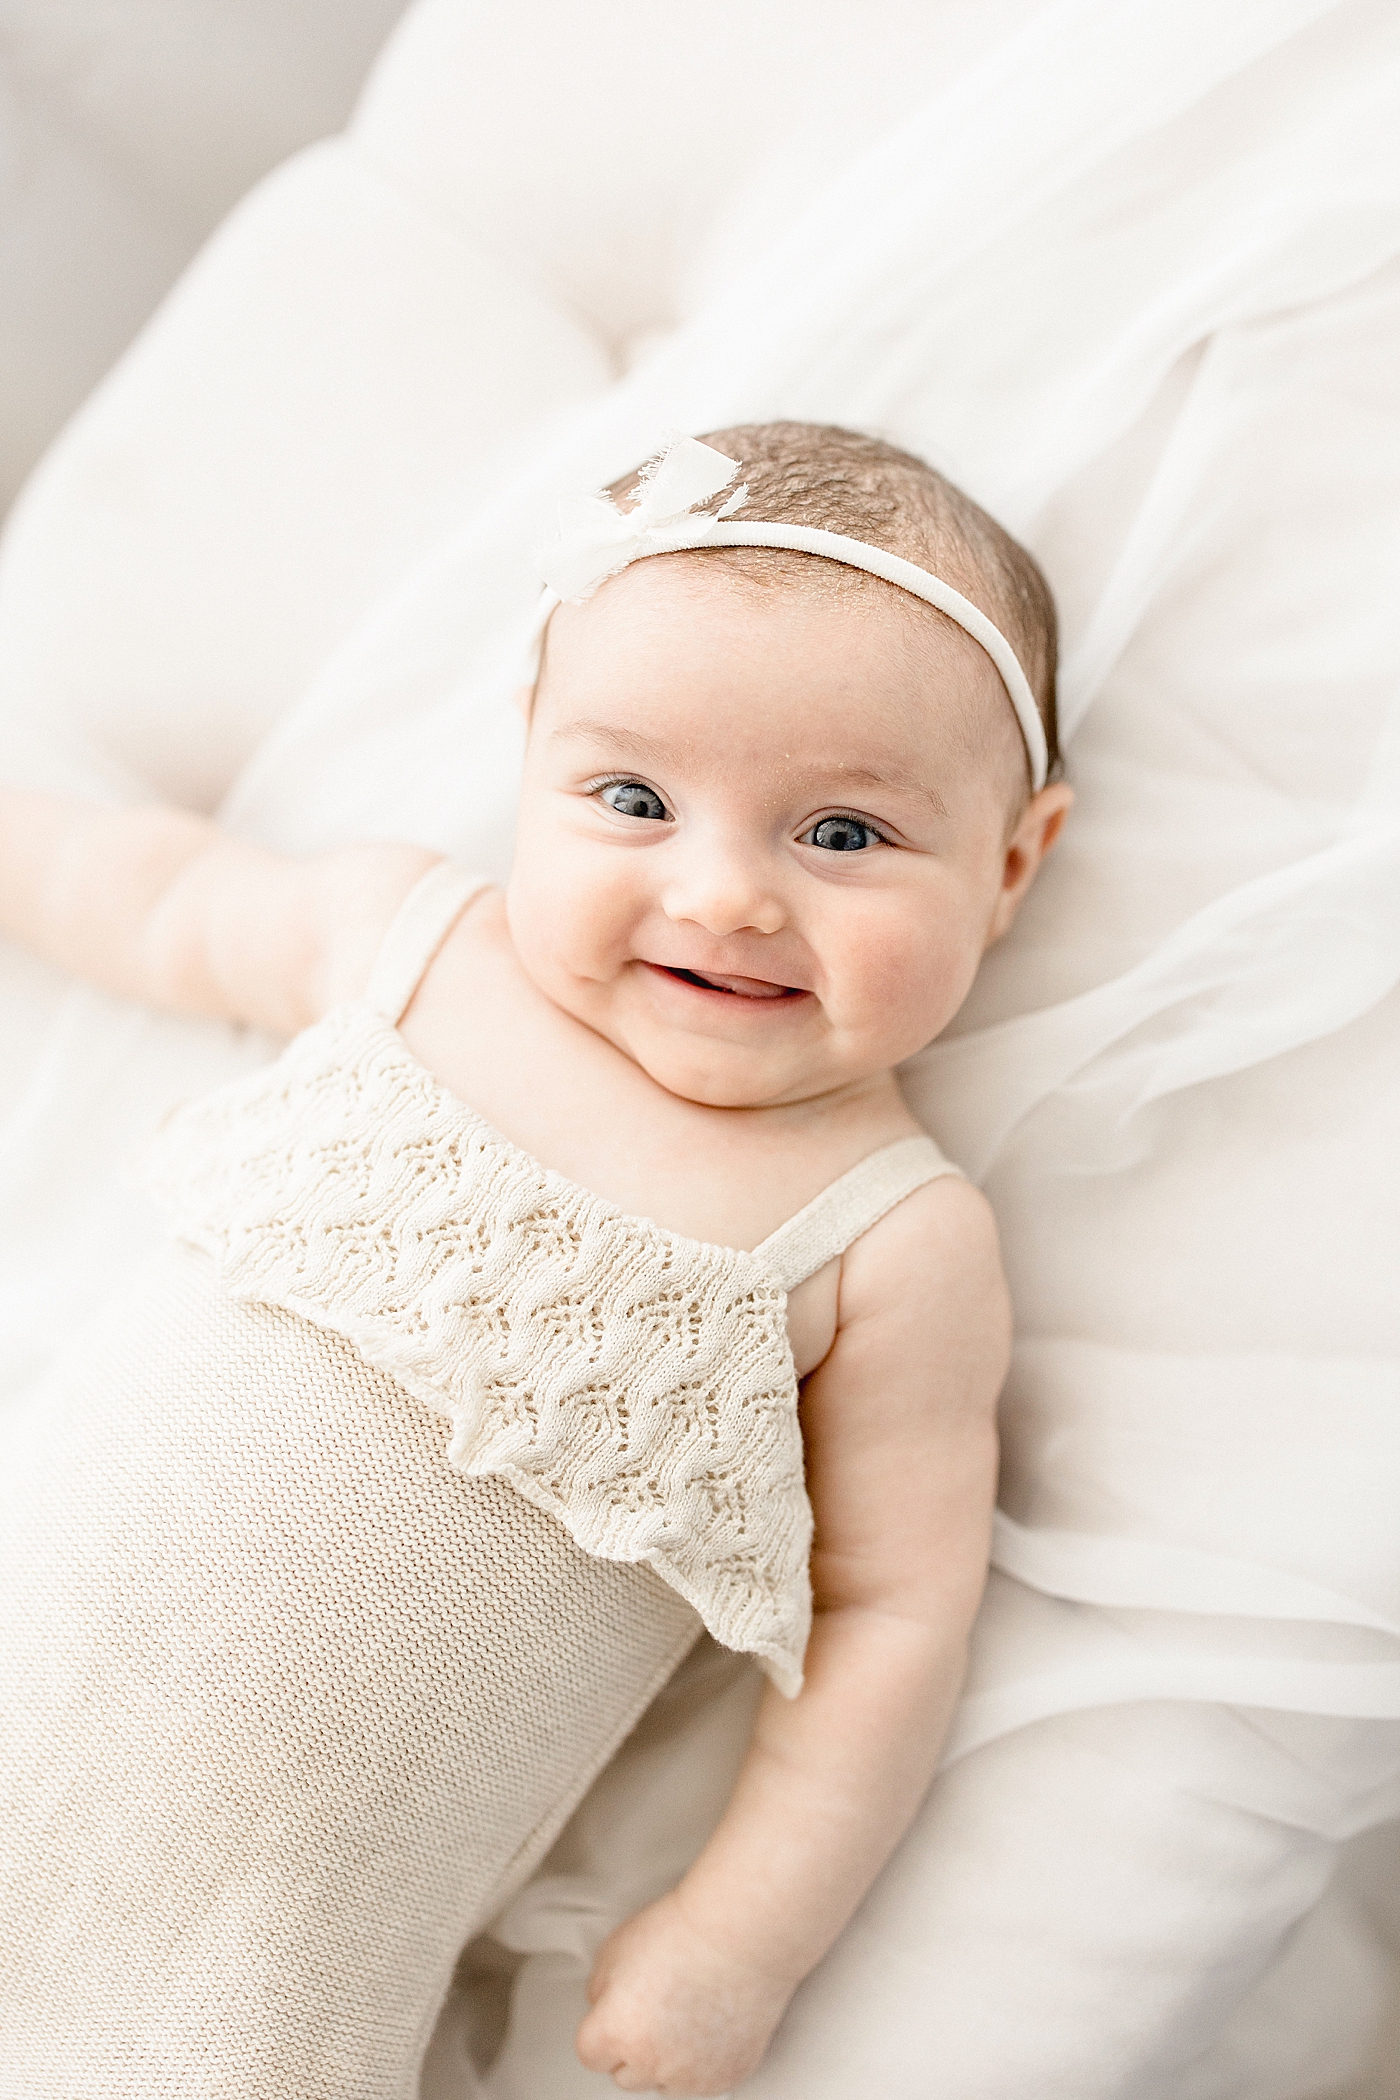 3 month old baby girl smiling for photos with Brittany Elise Photography.